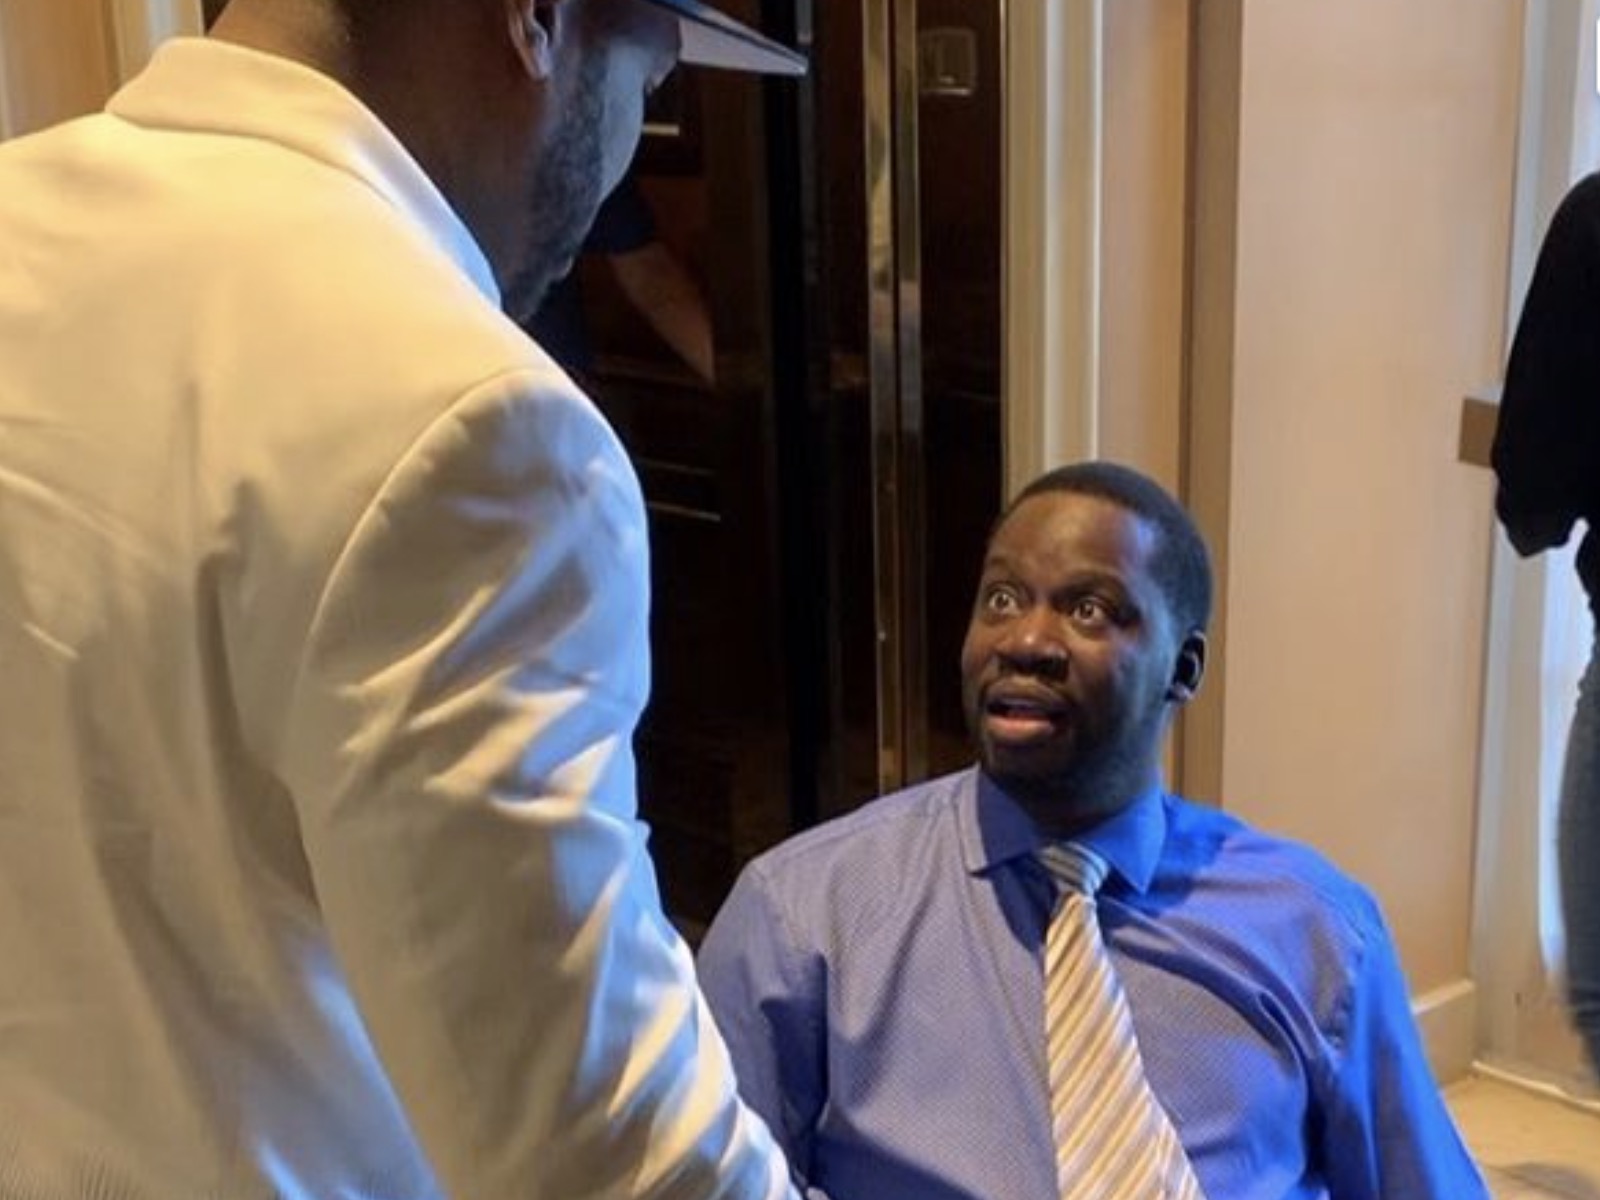 50 Cent Pulls Up On Hollywood Star Daryl Mitchell About Owing Him Money: 